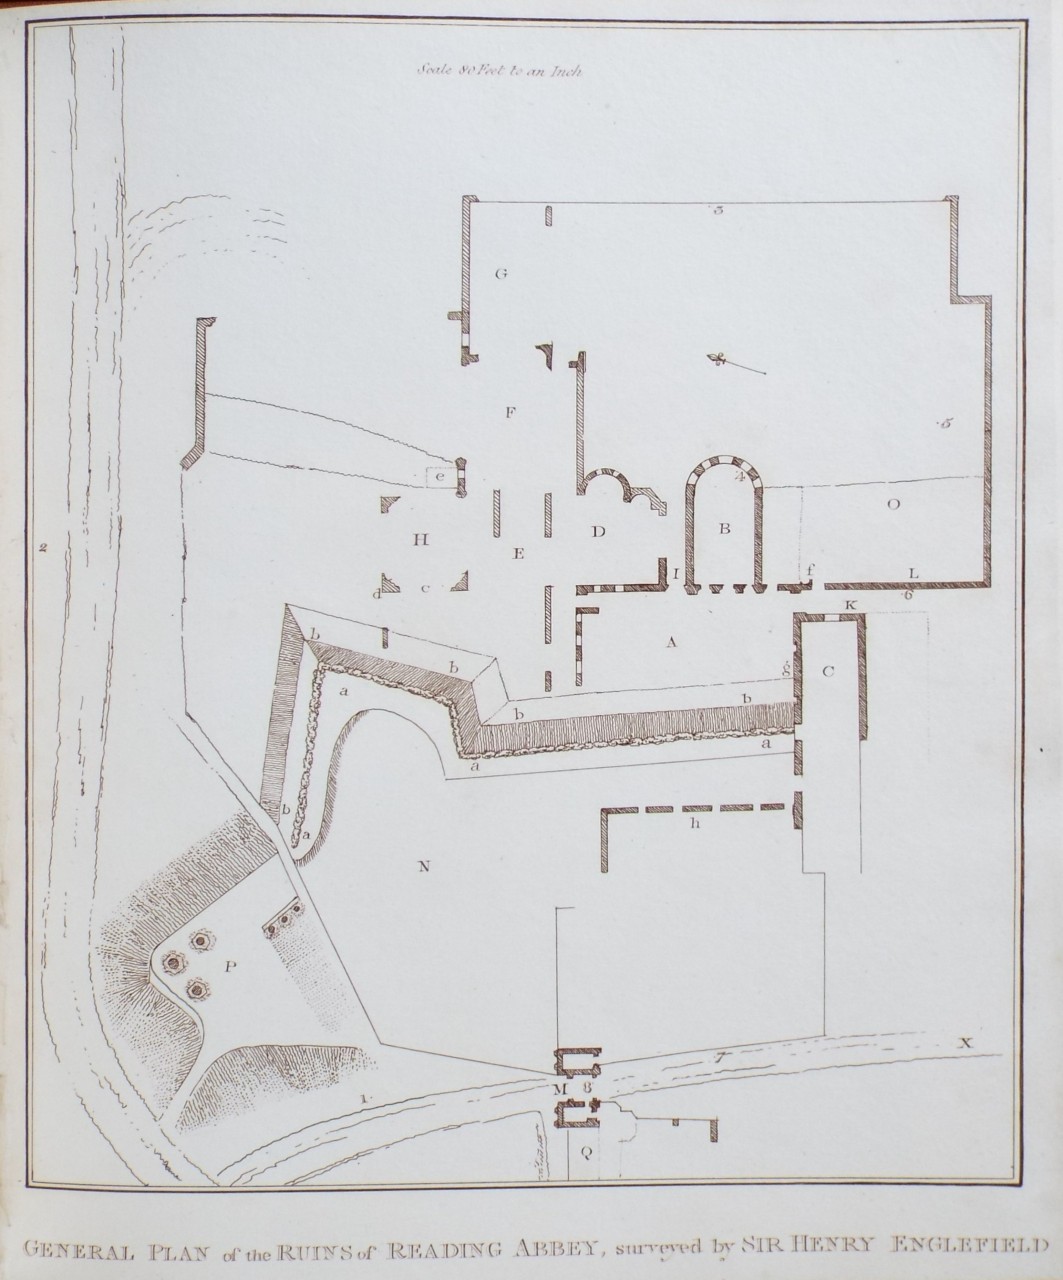 Print - General Plan of the Ruins of Reading Abbey, surveyed by Sir Henry Englefield.